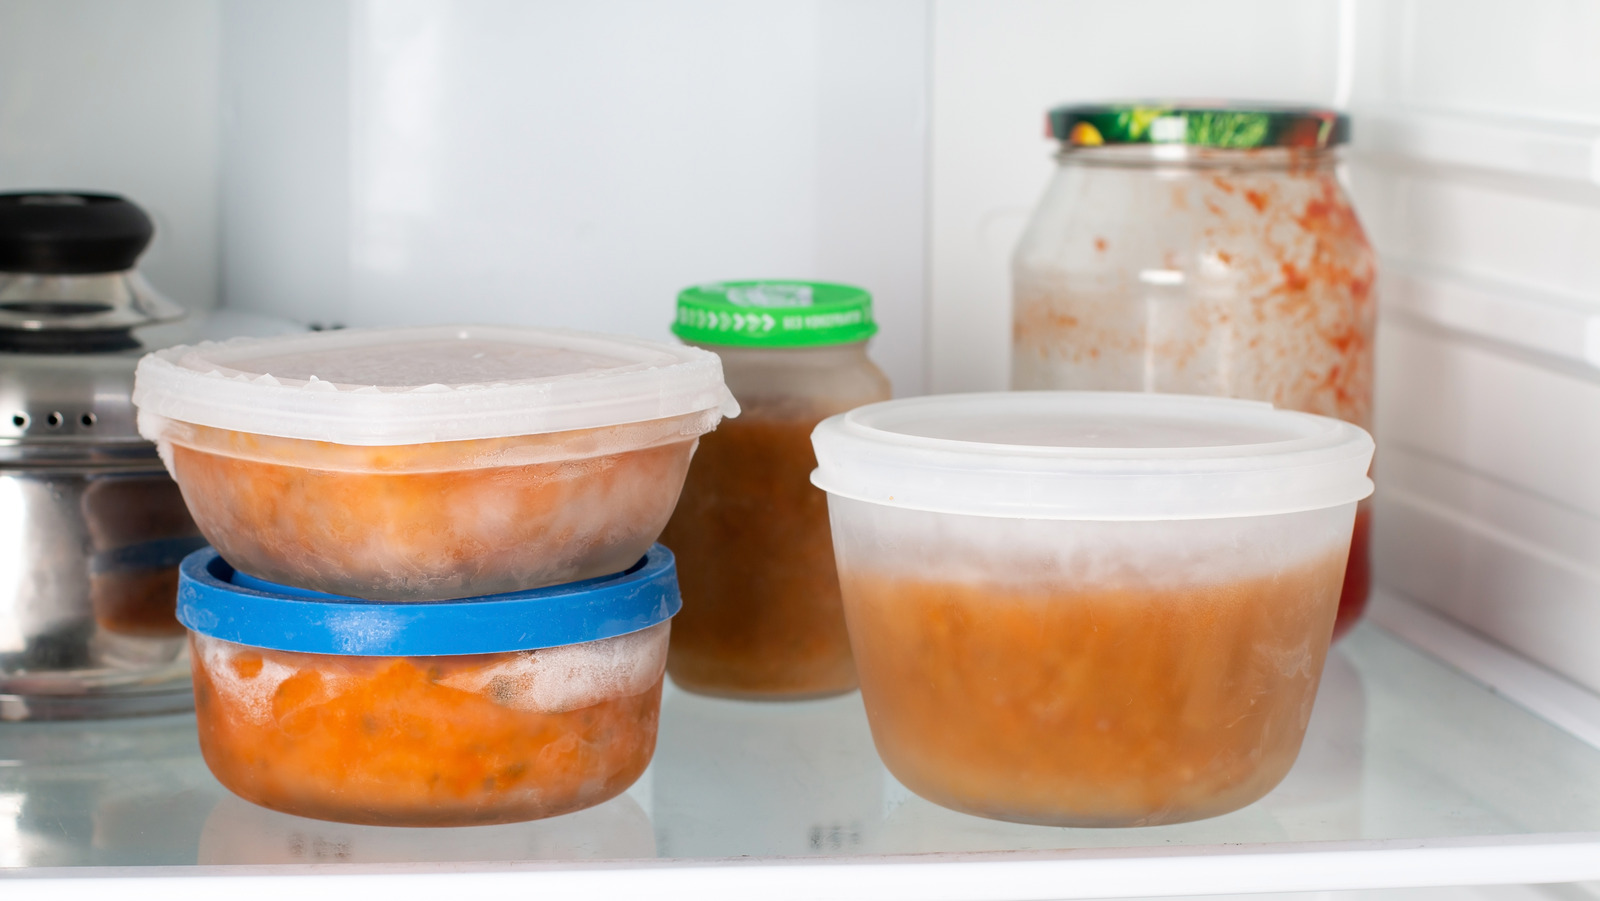 https://www.tastingtable.com/img/gallery/the-reason-you-shouldnt-freeze-your-food-in-glass-jars/l-intro-1643228960.jpg